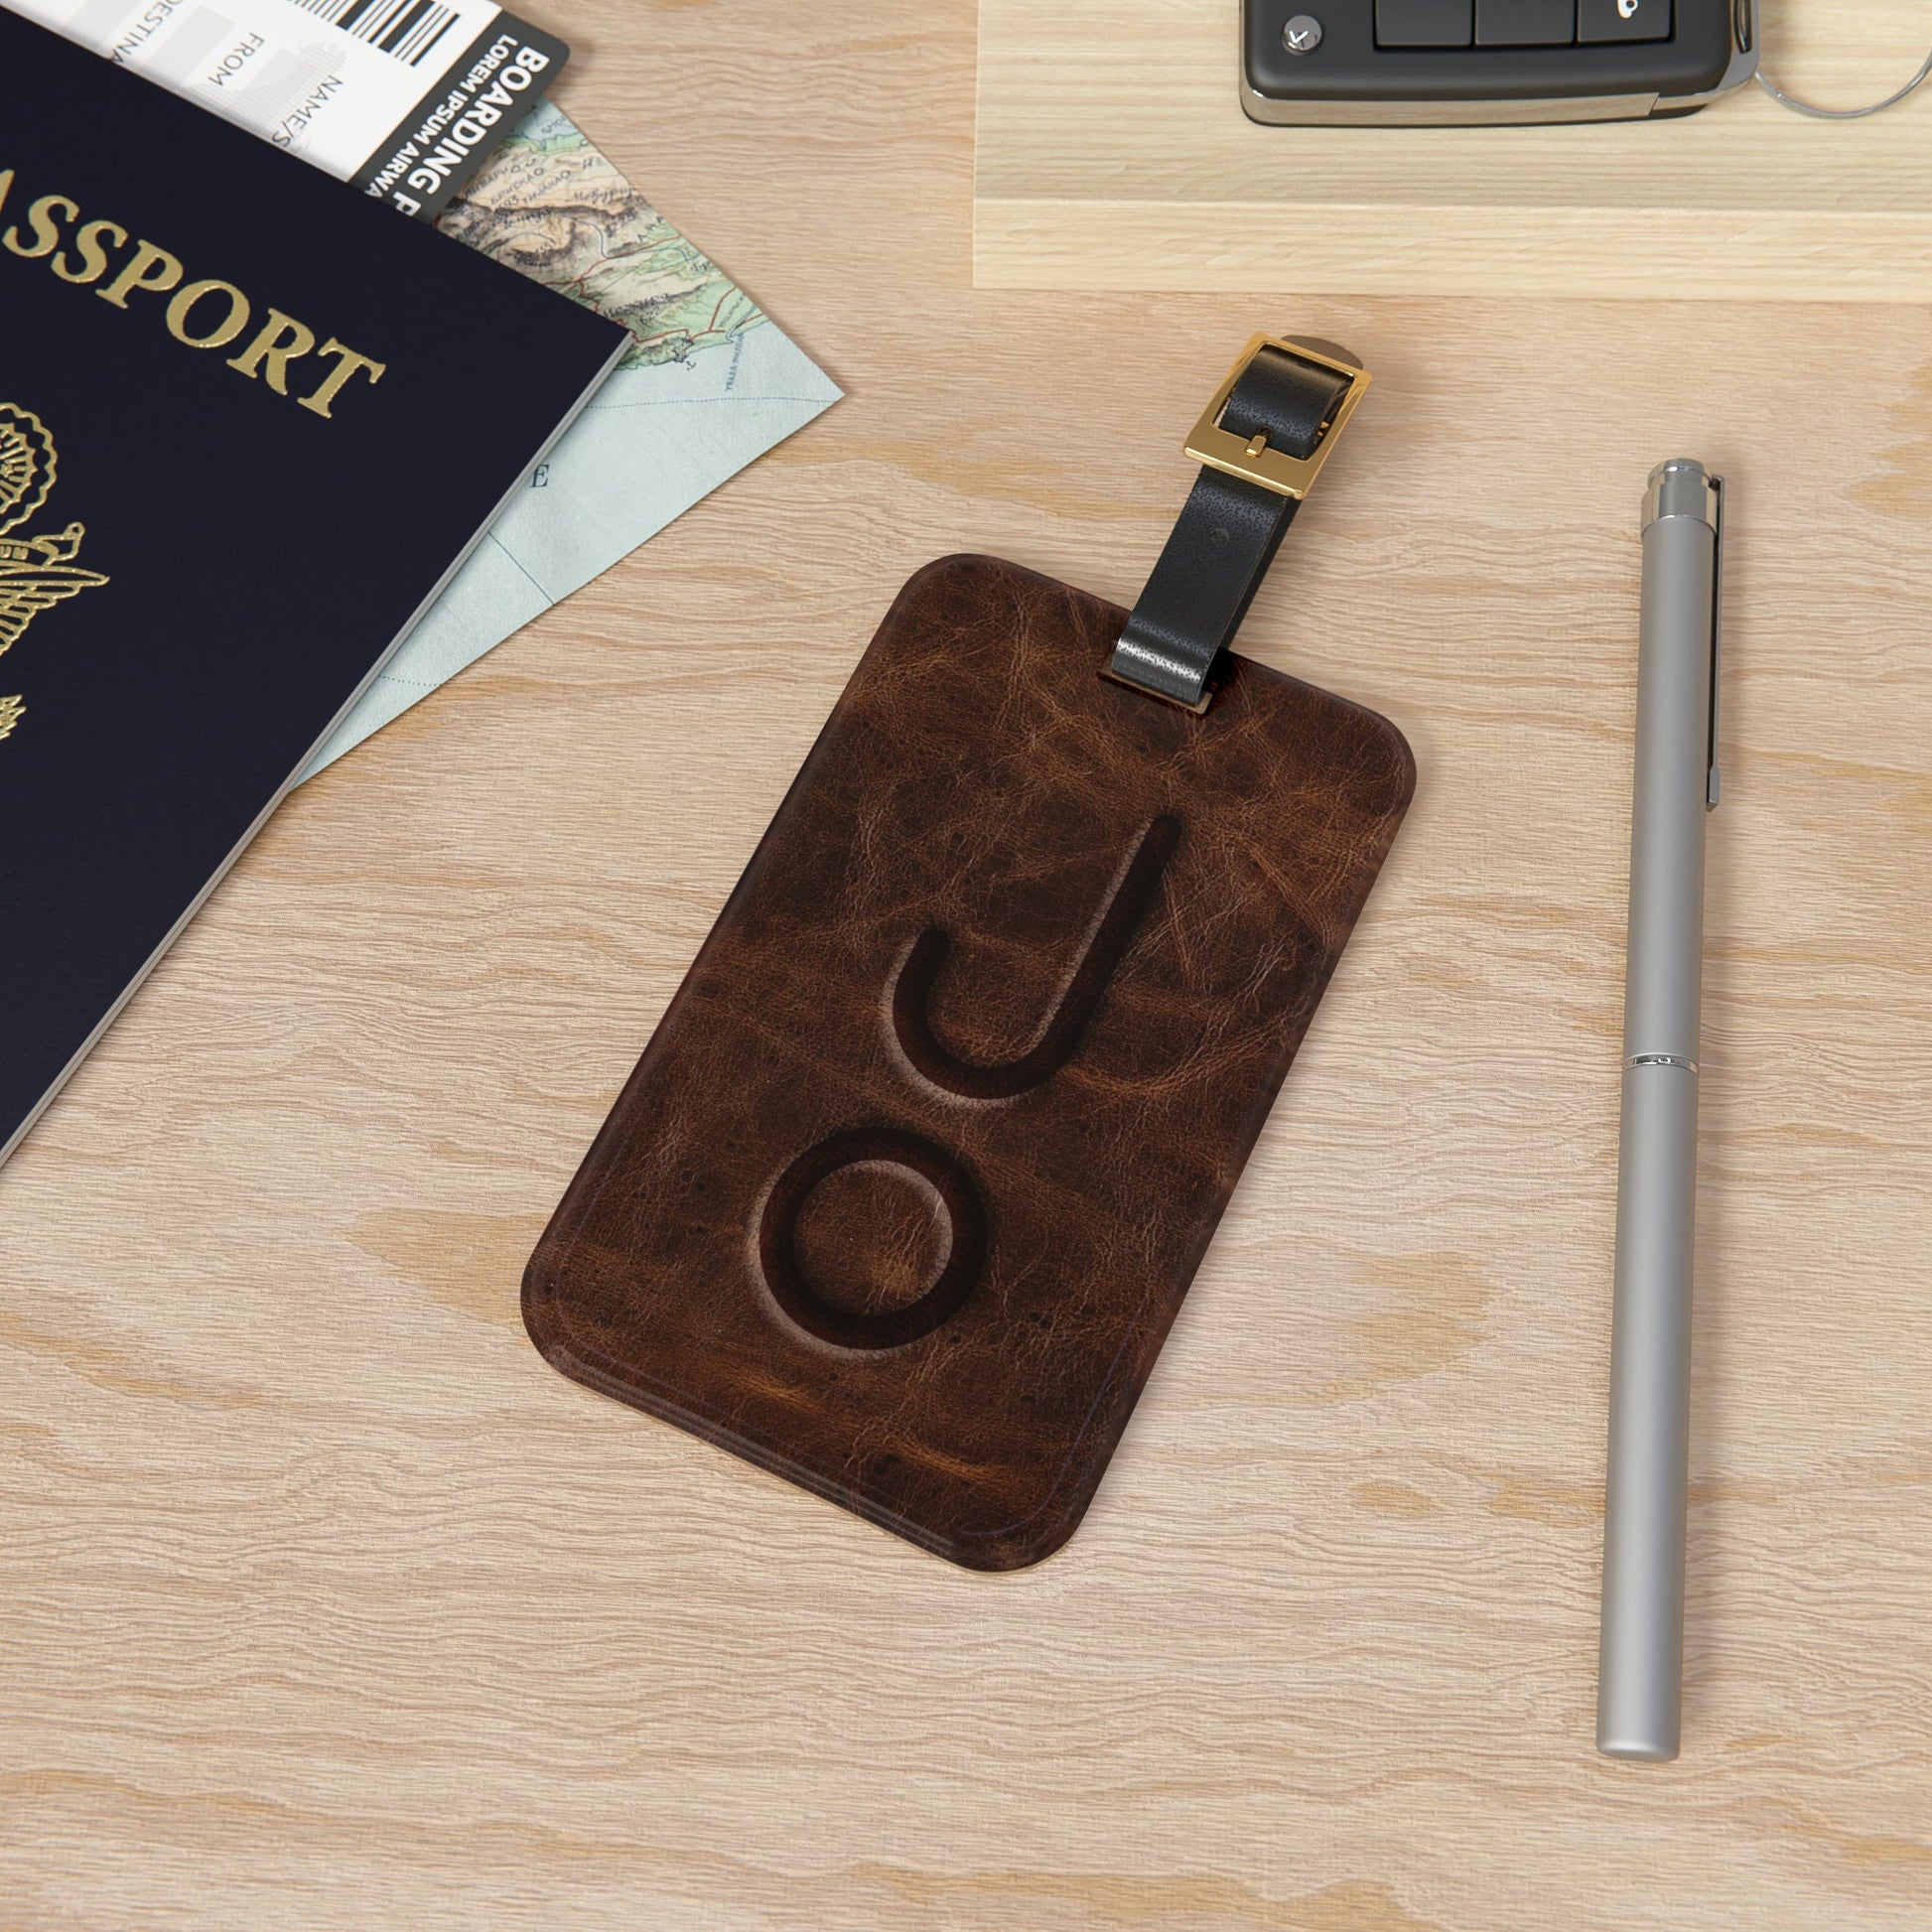 Cattle Brand Luggage Tag Customized Family Cattle Brand Luggage Tag Family Livestock Brand Leather Looking Suitcase Tag Travel Accessory